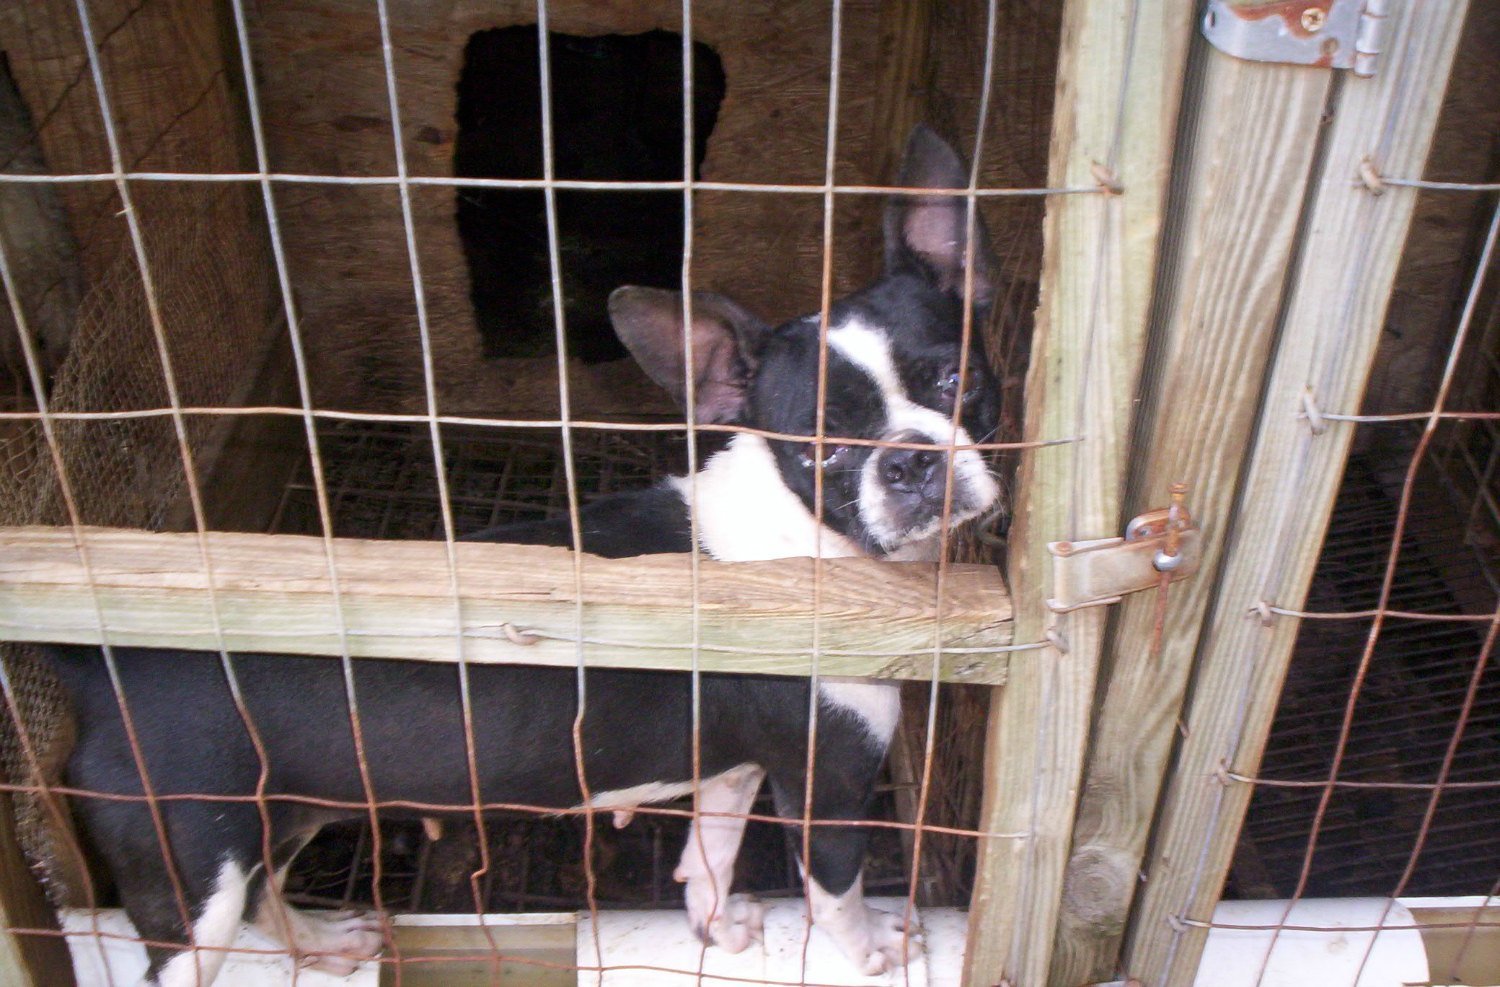 Boston terrier in a dirty little enclosure